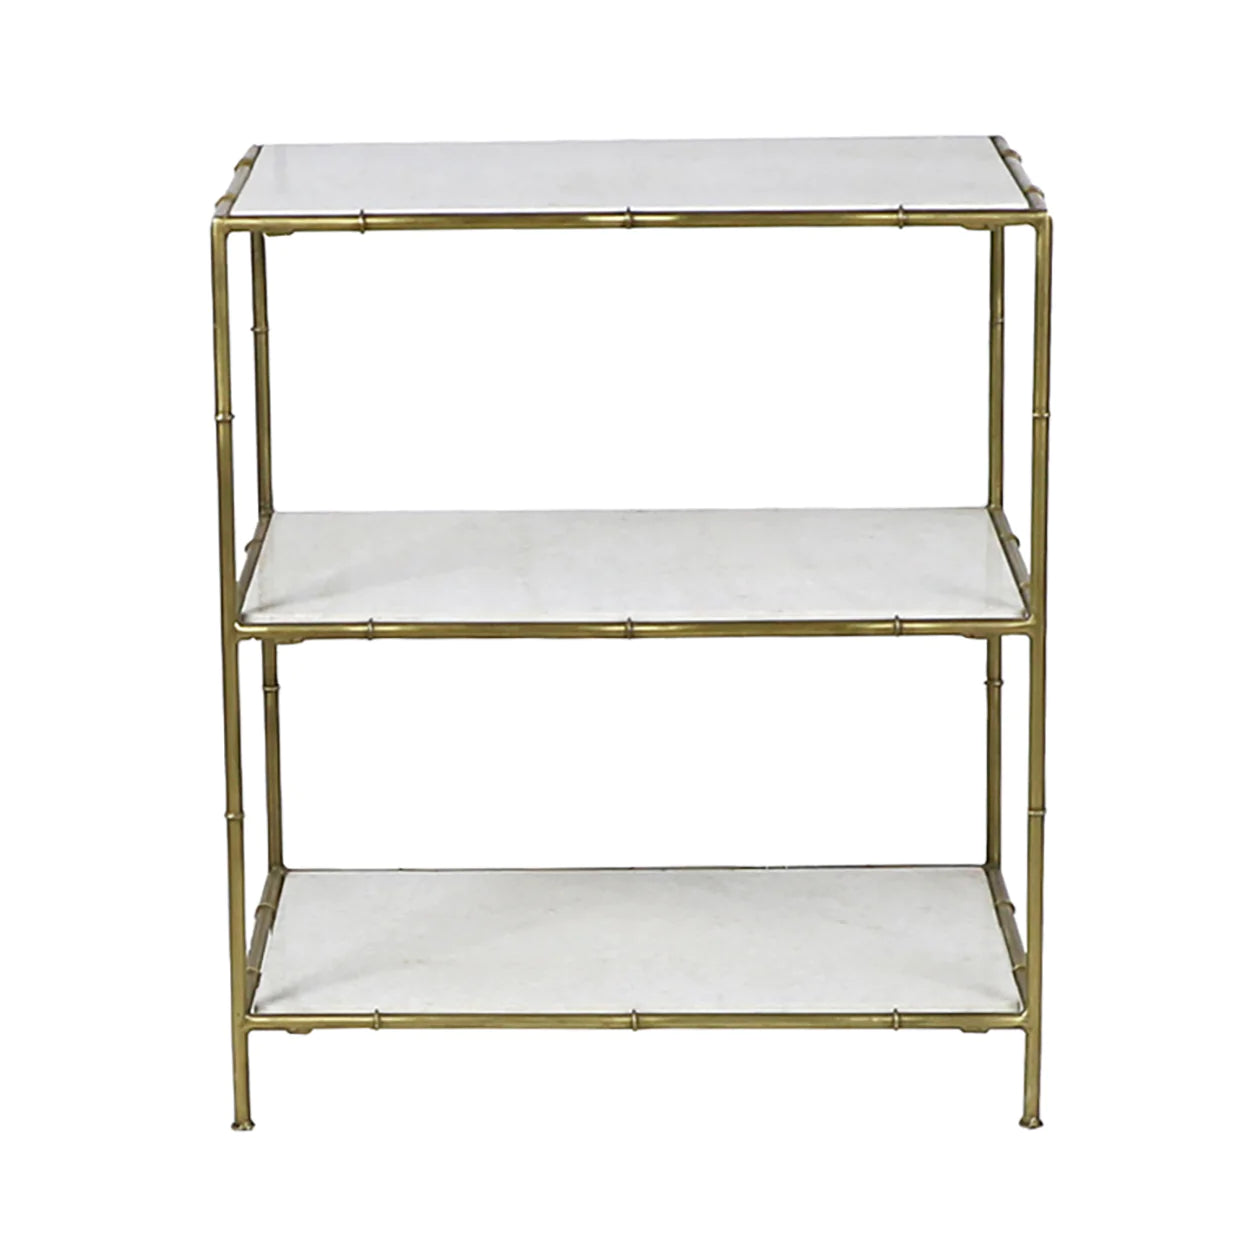 Faux Bamboo White Marble on Brass Stand Shelf